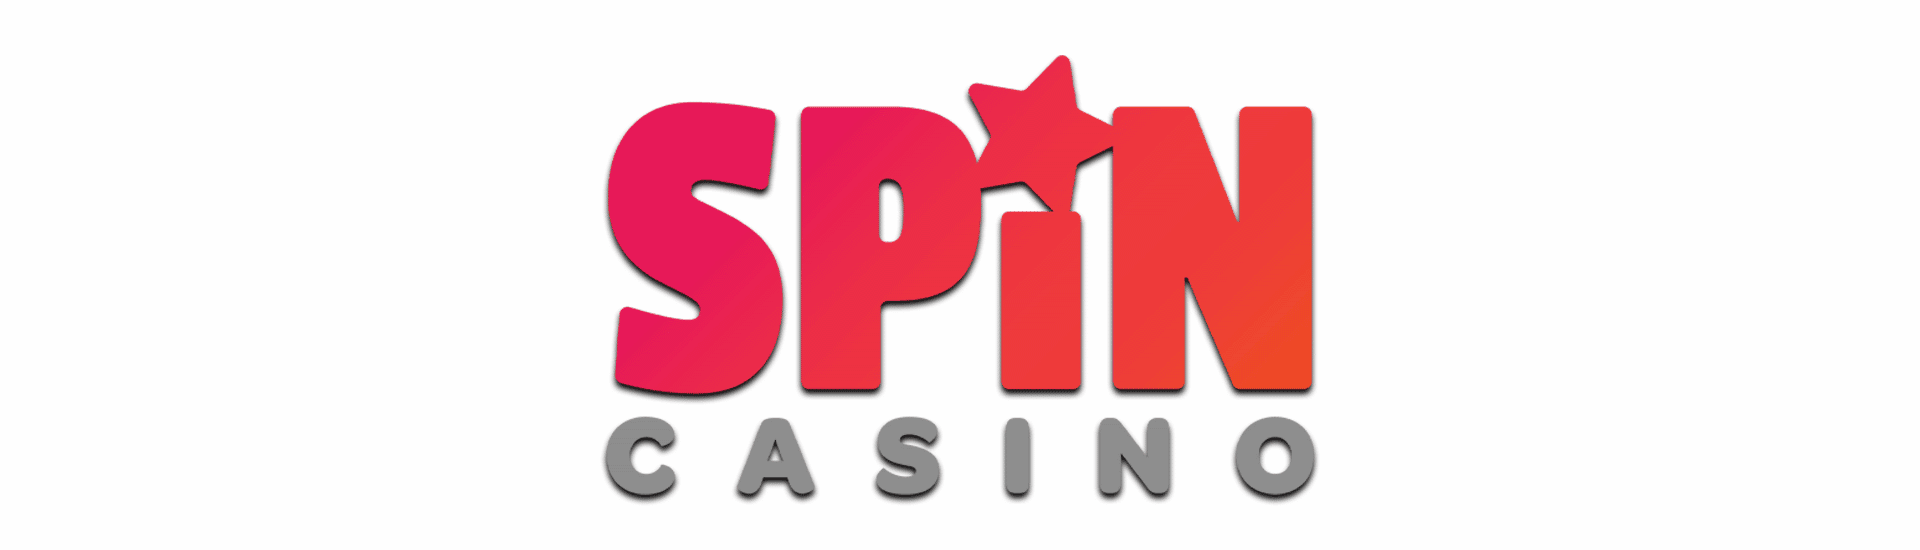 Spin Casino Featured Image